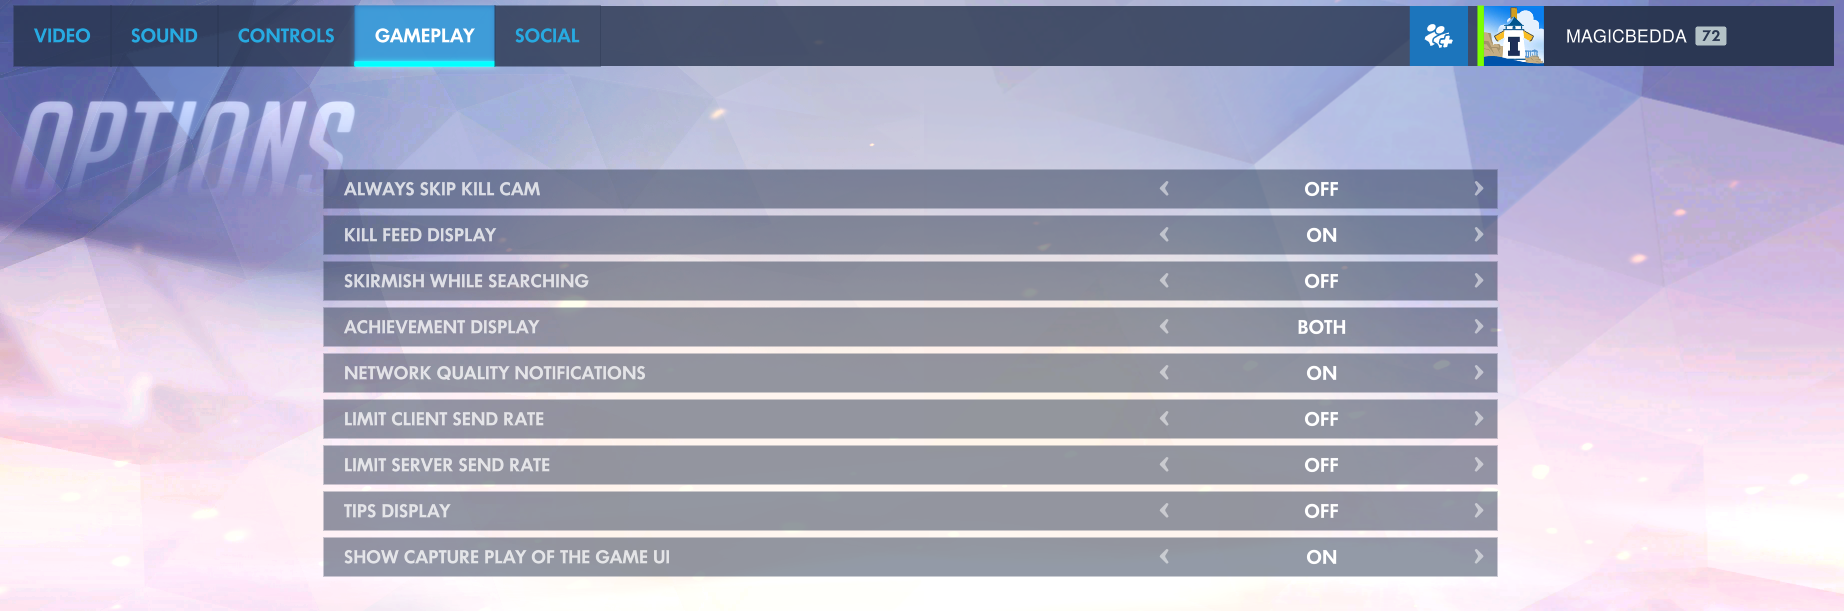 OW_Gameplay_2018-01-06.png